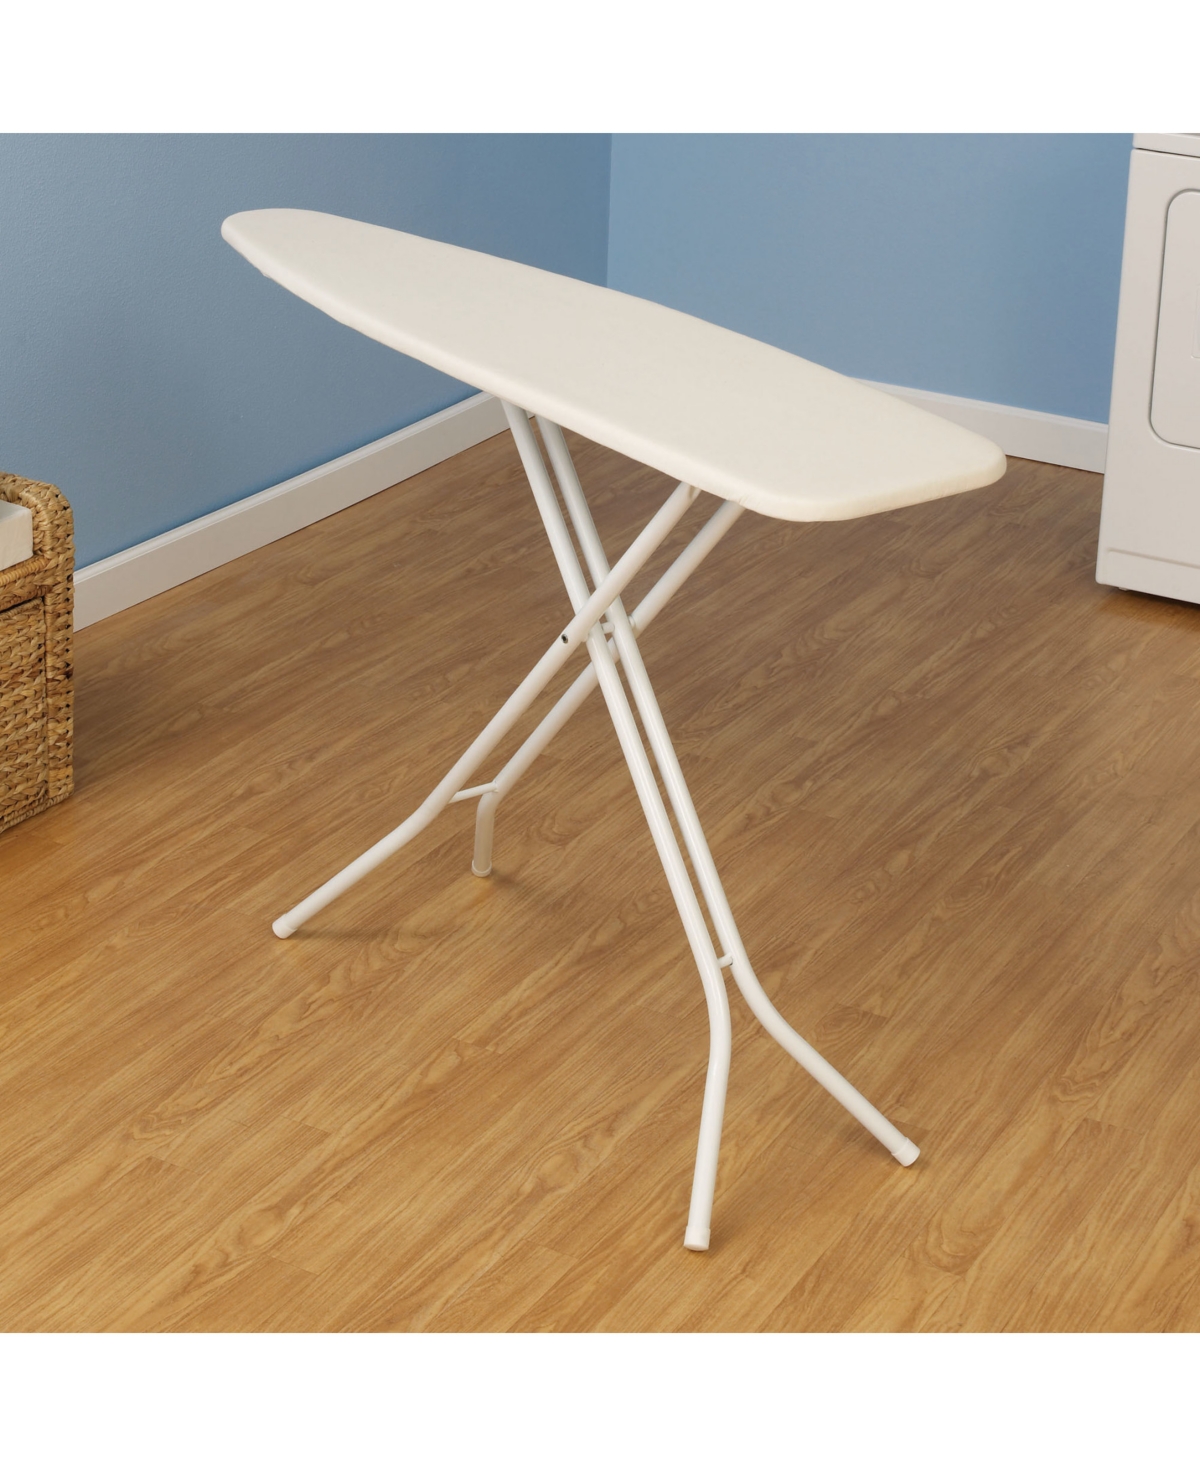 Shop Household Essentials 4-leg Ironing Board, 2 Stripe 2 Blue Covers In Cream